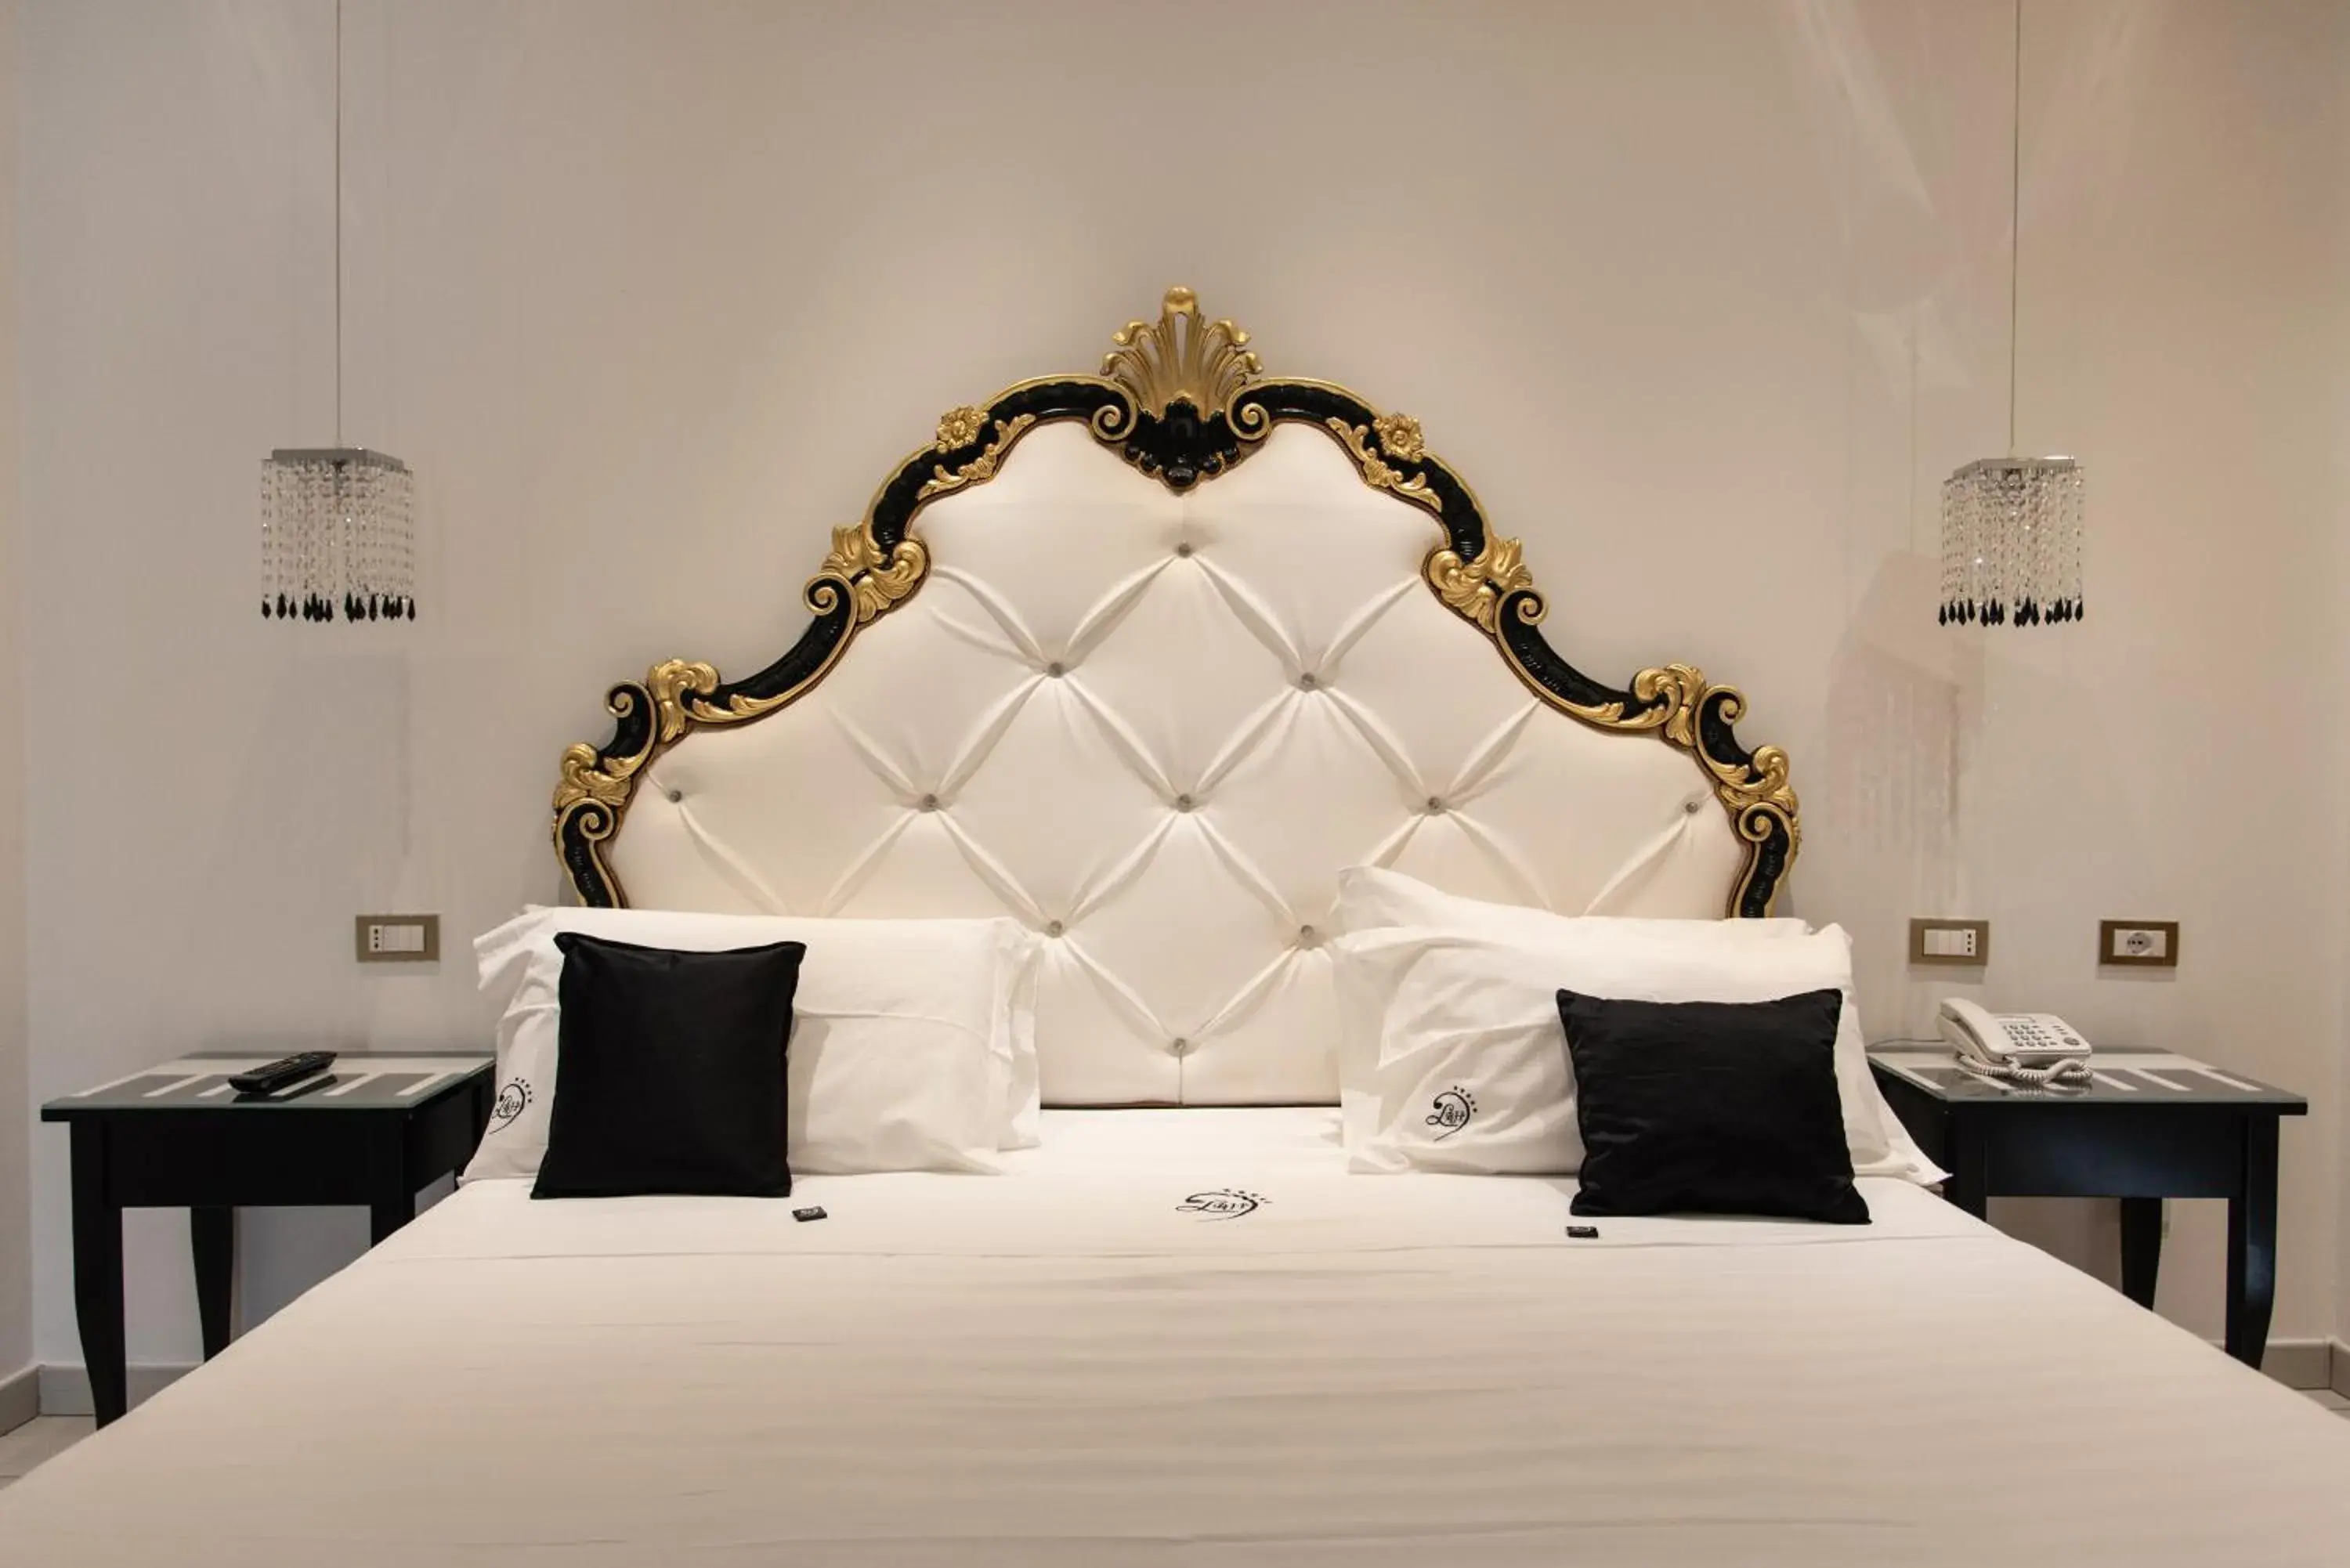 Bed in Ludwig Boutique Hotel